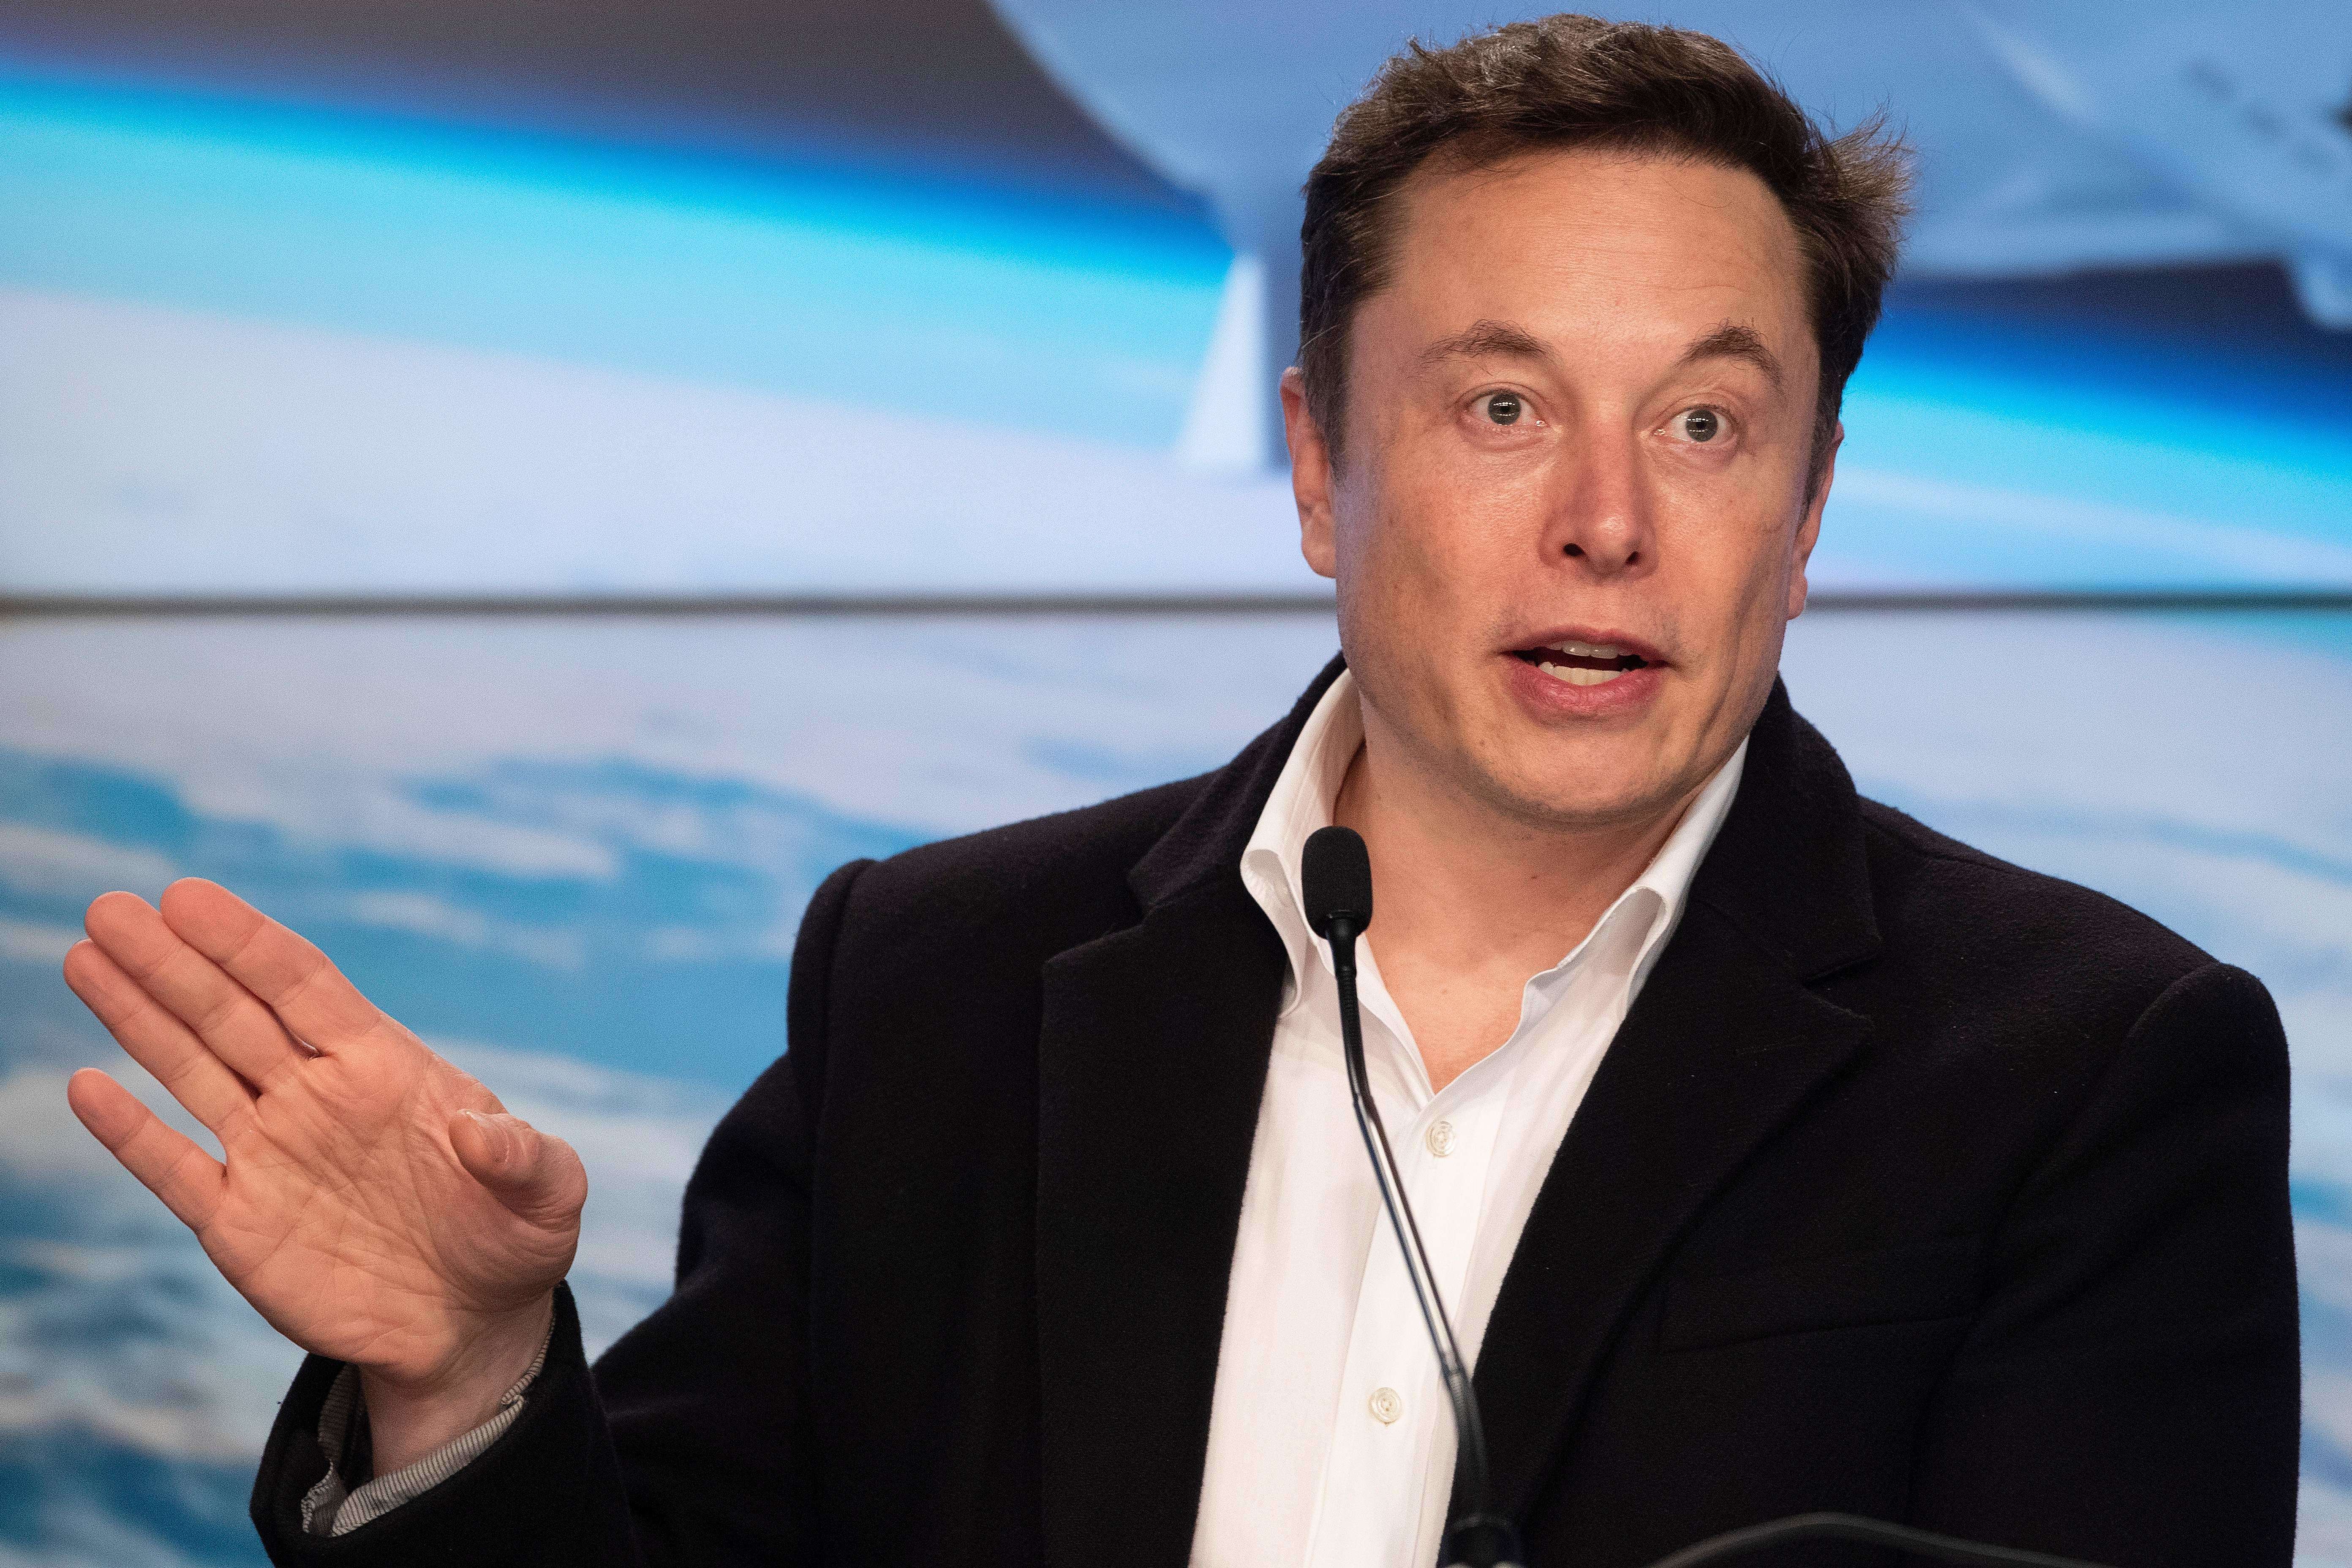 image for Elon Musk says SpaceX Starlink internet satellites are key to funding his Mars vision